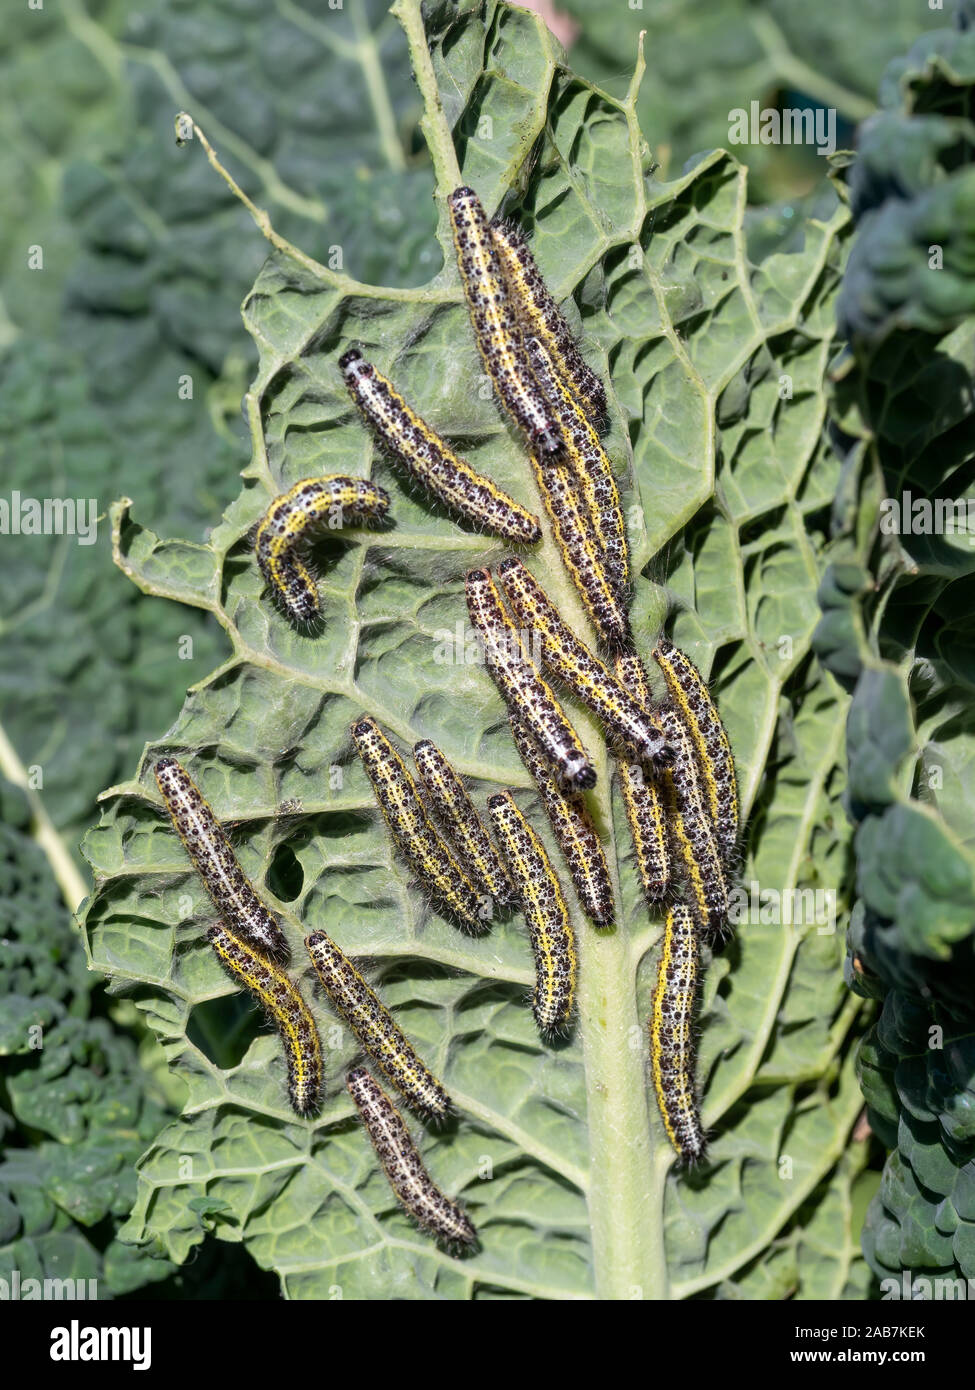 Many Pieris brassicae caterpillars - larvae of the Large Cabbage White butterfly. Stock Photo